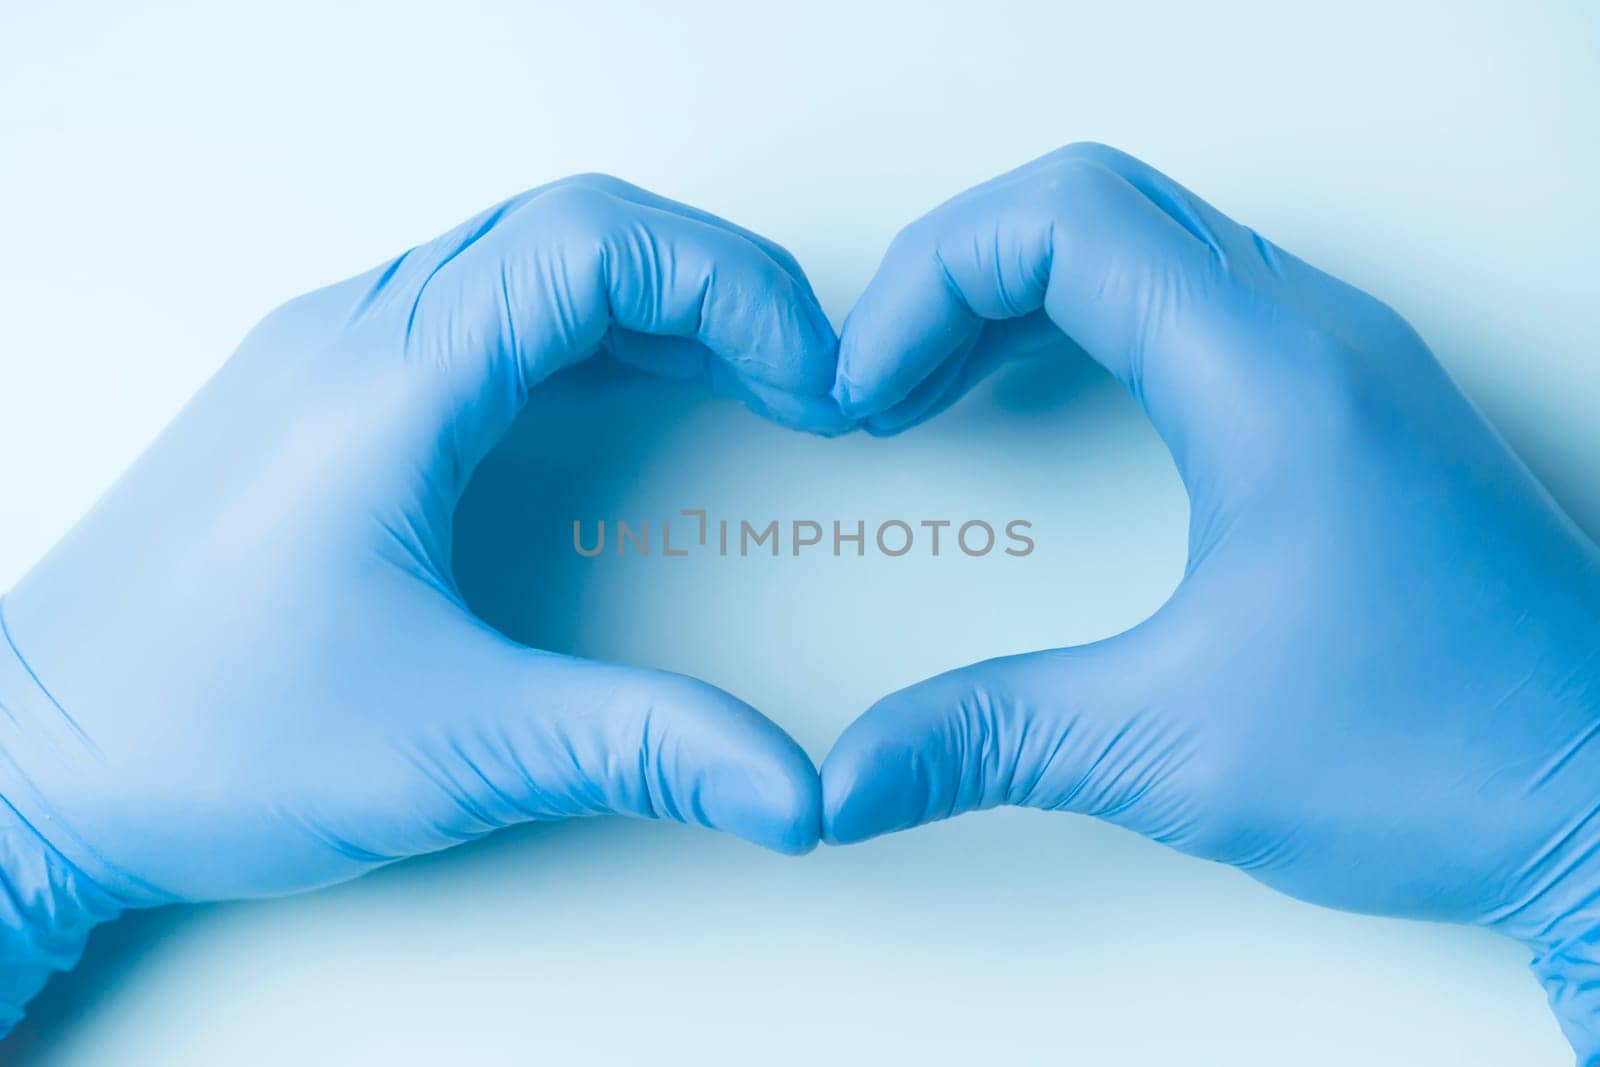 The hands of a doctor in blue gloves show the heart on a light background, as a symbol of medicine taking care of the patient's health.